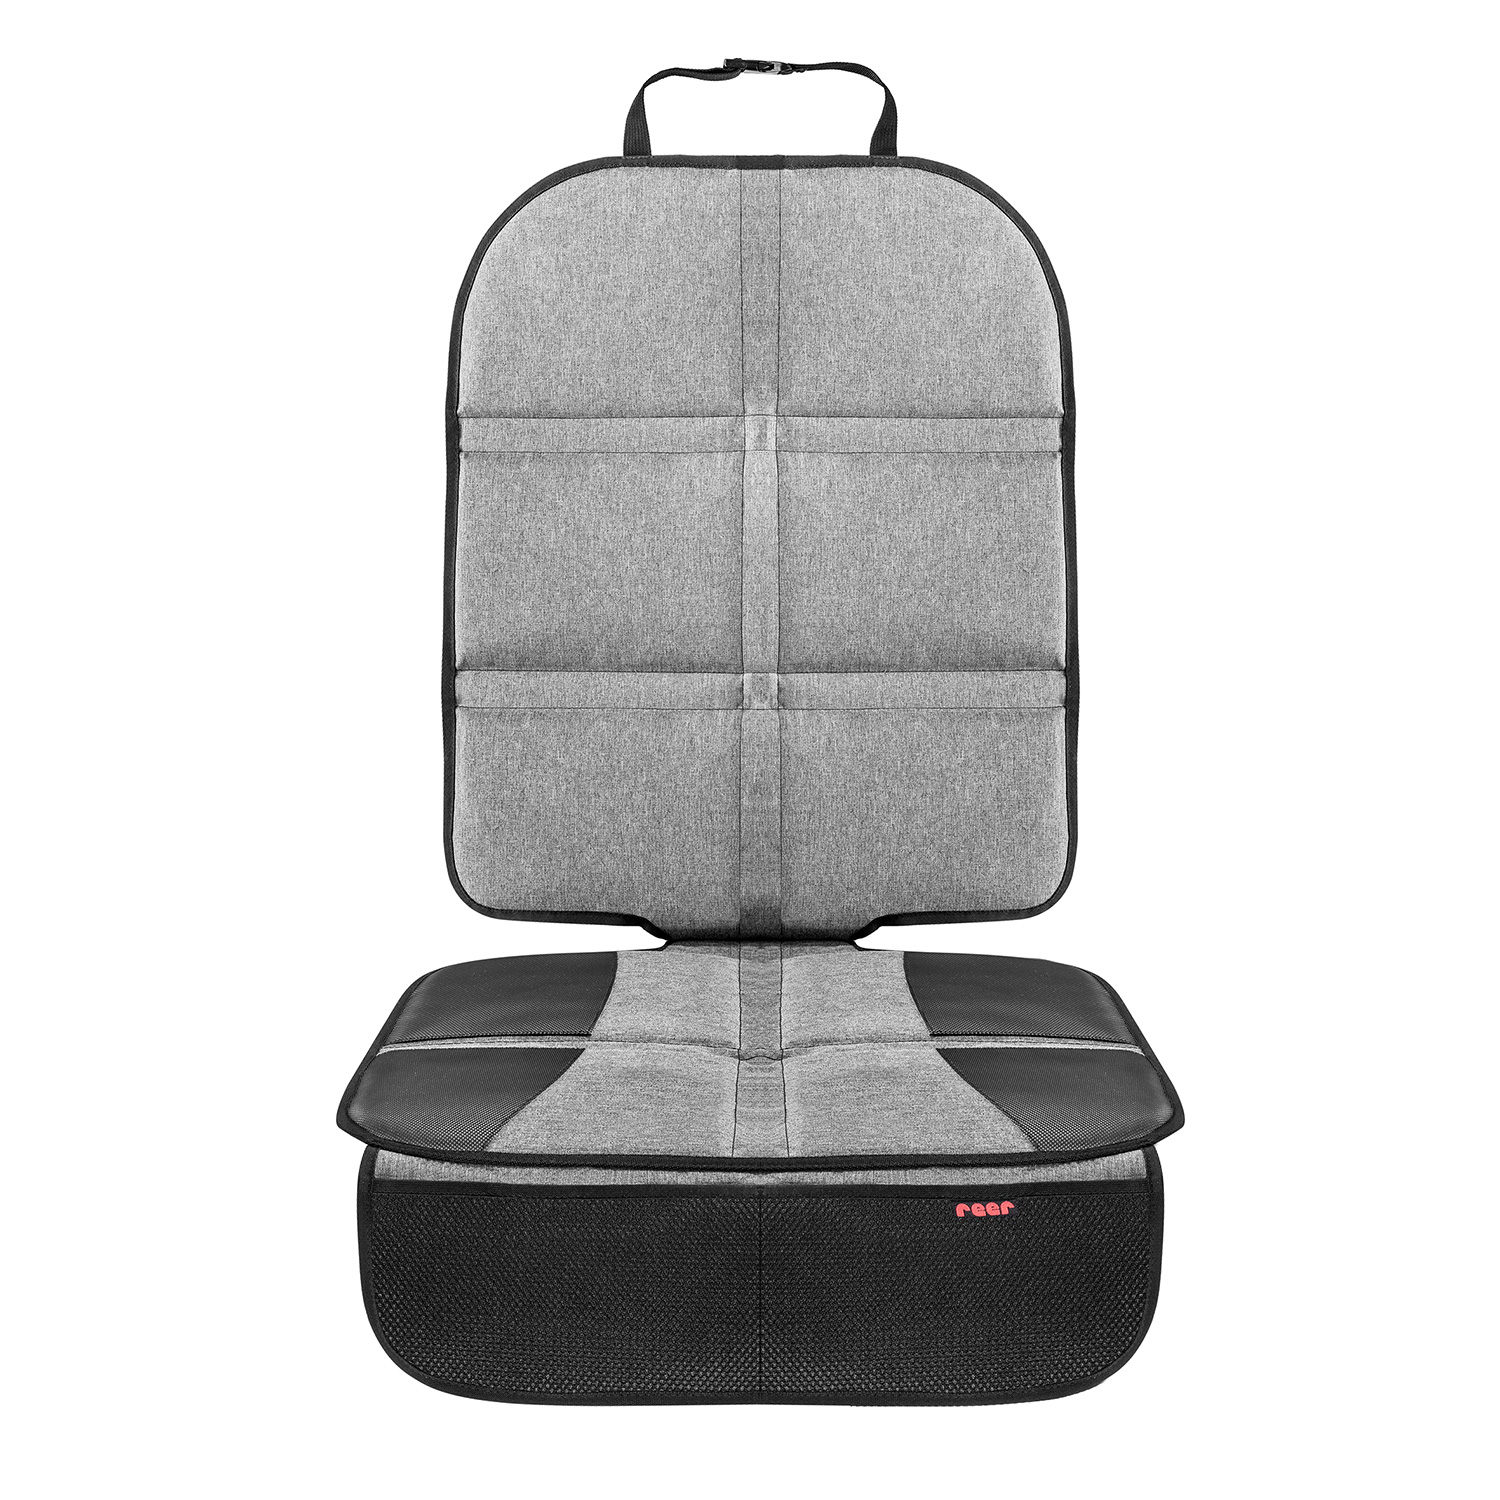 Reer TravelKid Maxi Protect Car Seat Protection Pad online